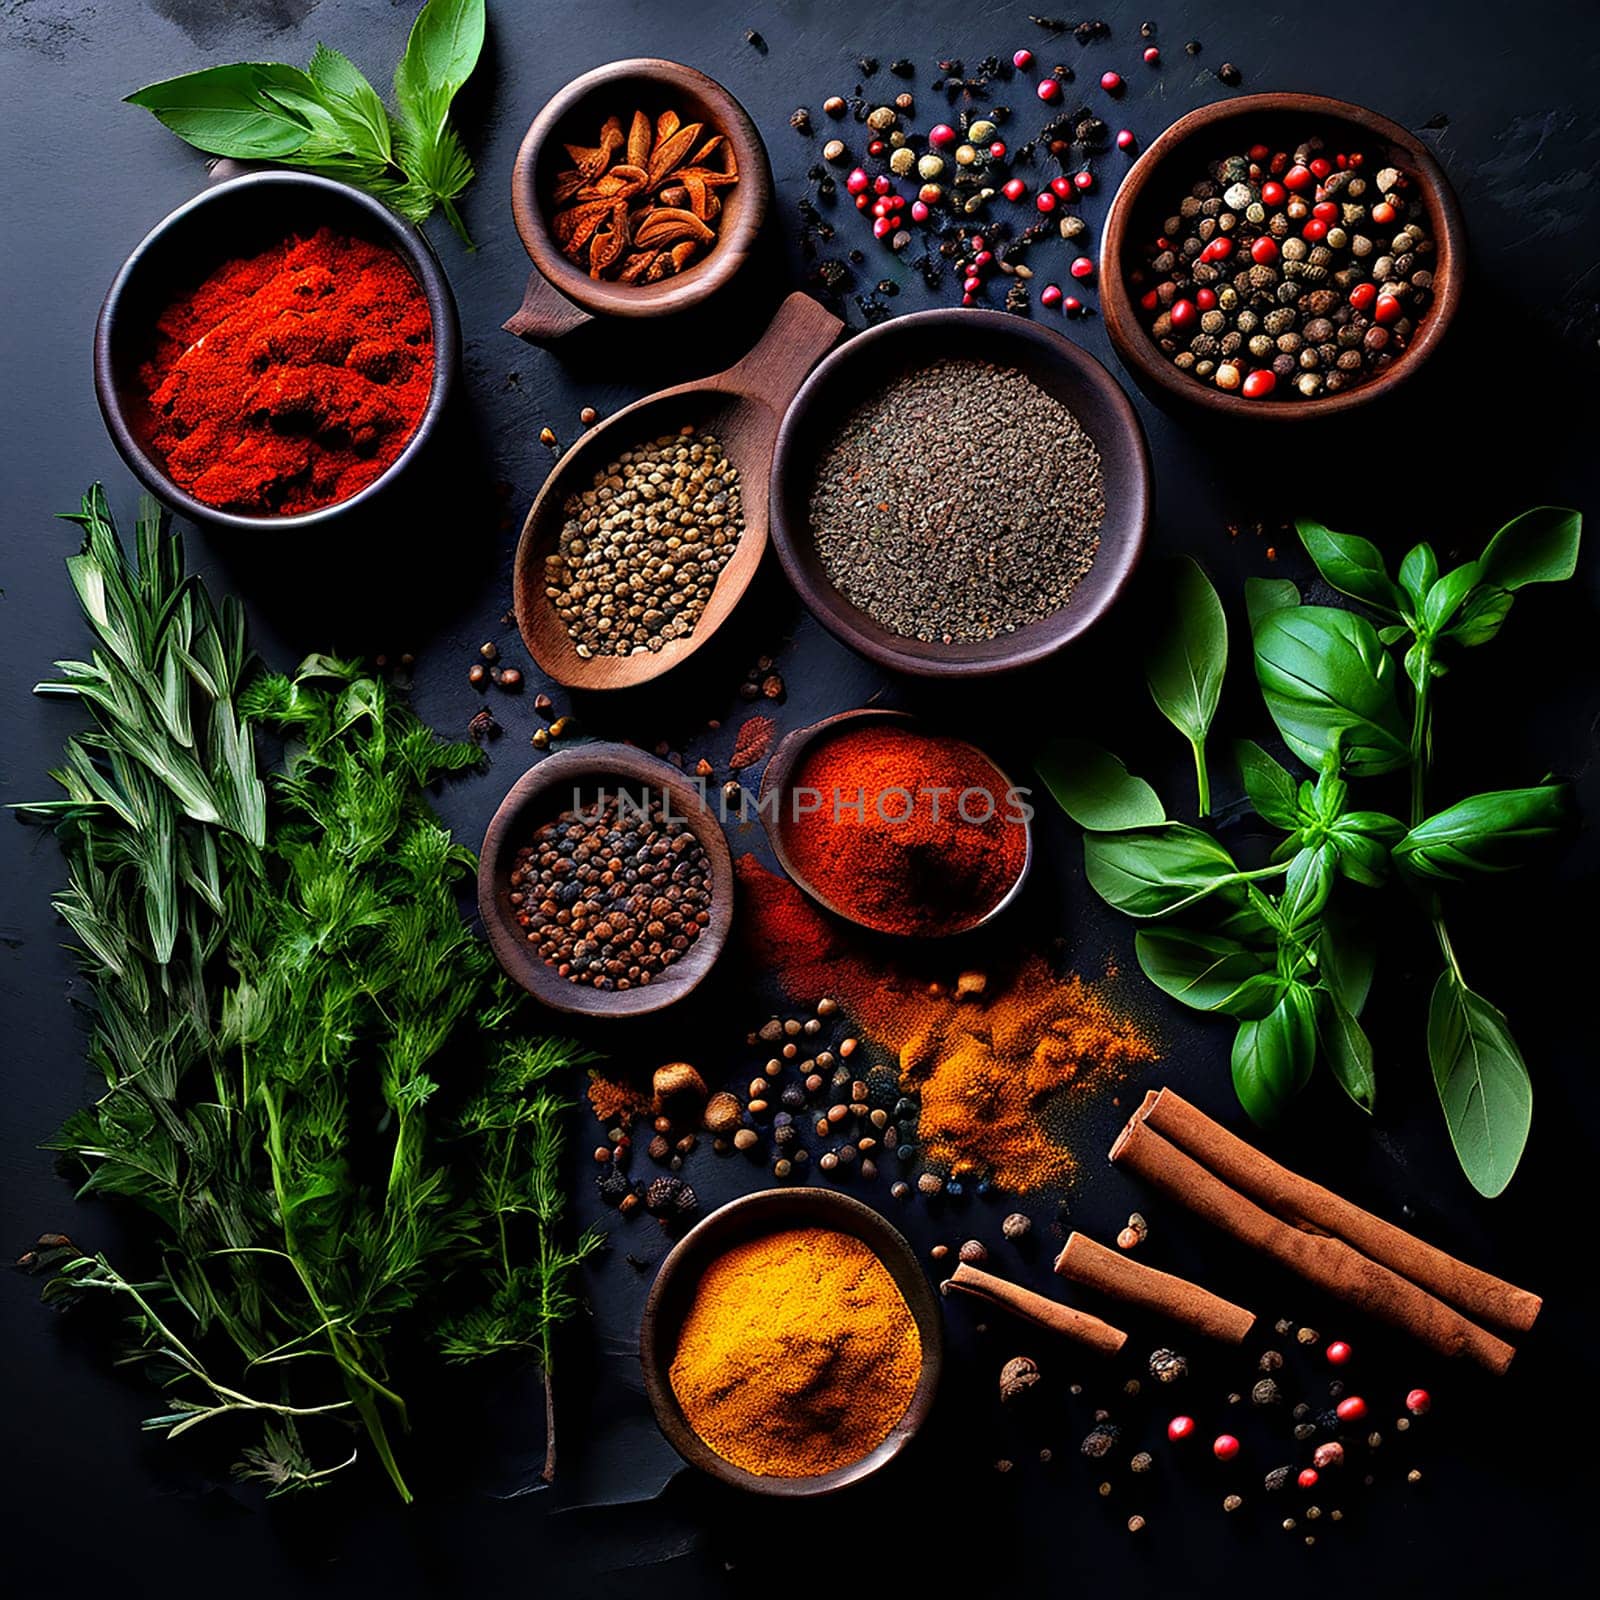 Spice Spectrum: Vibrant Herbs and Spices for Culinary Adventures by Petrichor